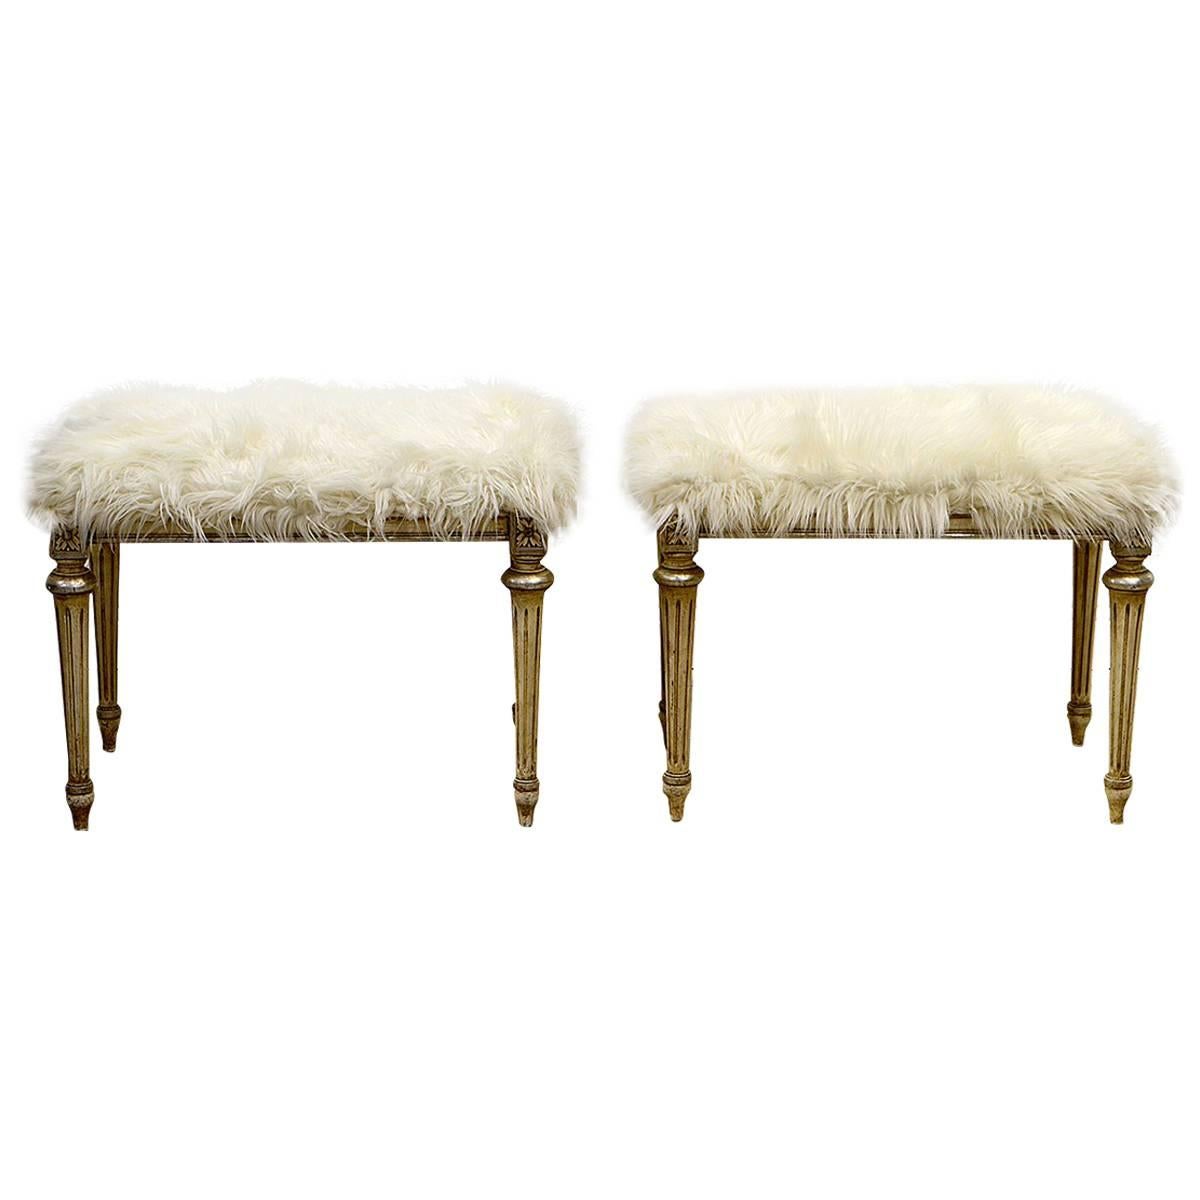 Pair of Chic Hollywood Regency Louis XVI Style Faux Fur Covered Benches